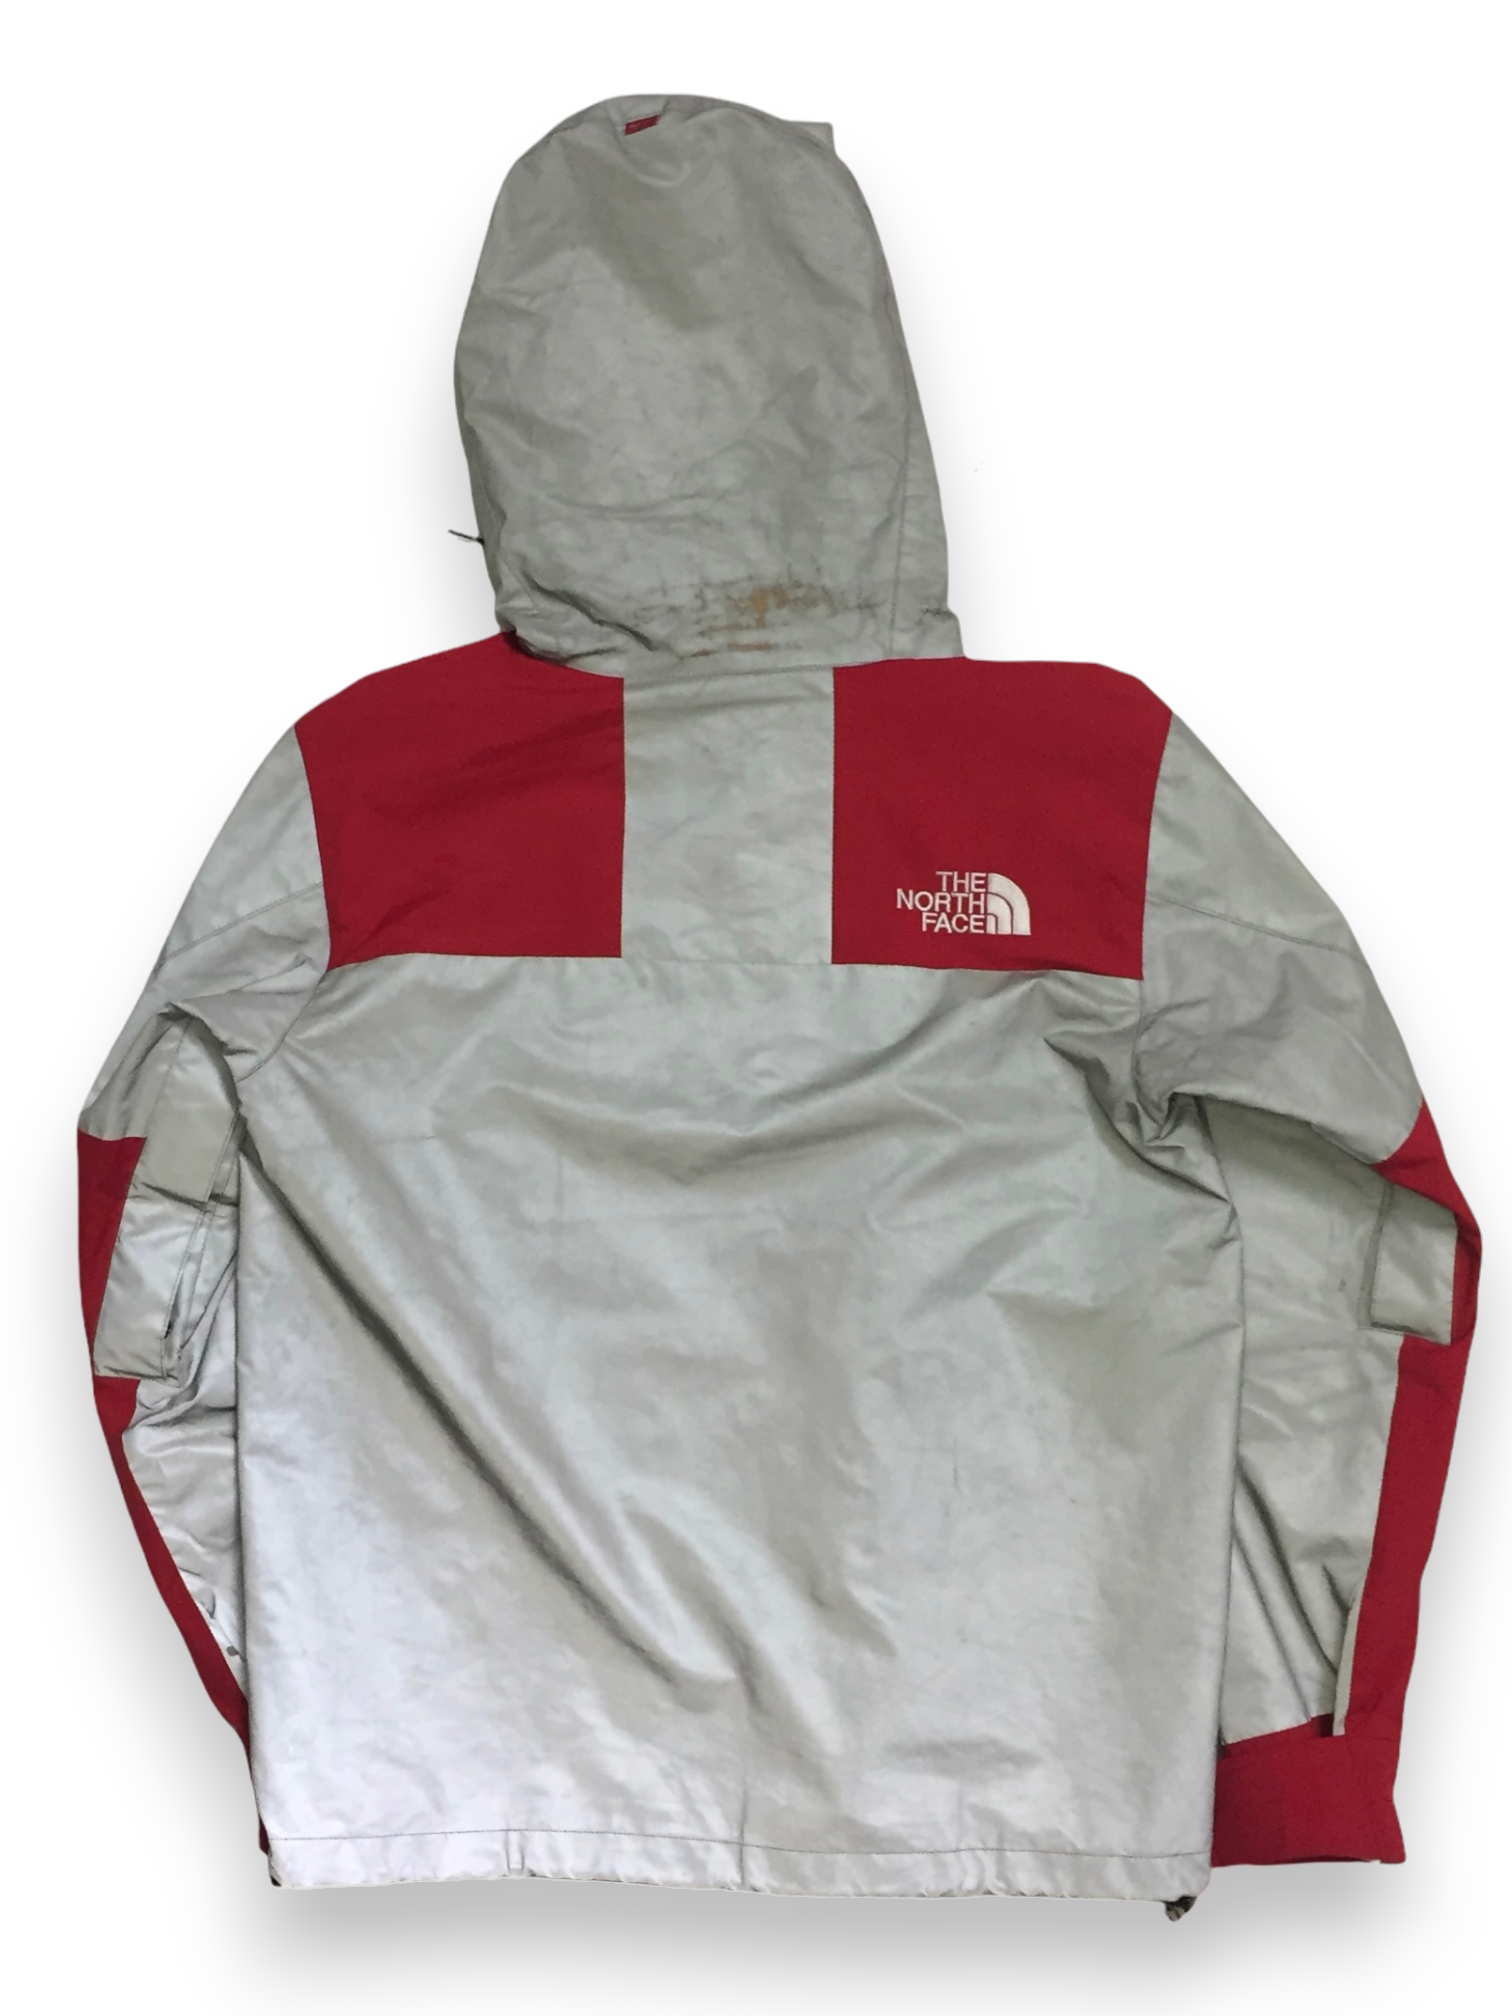 2013 Supreme x The North Face 3M Red Mountain Parka